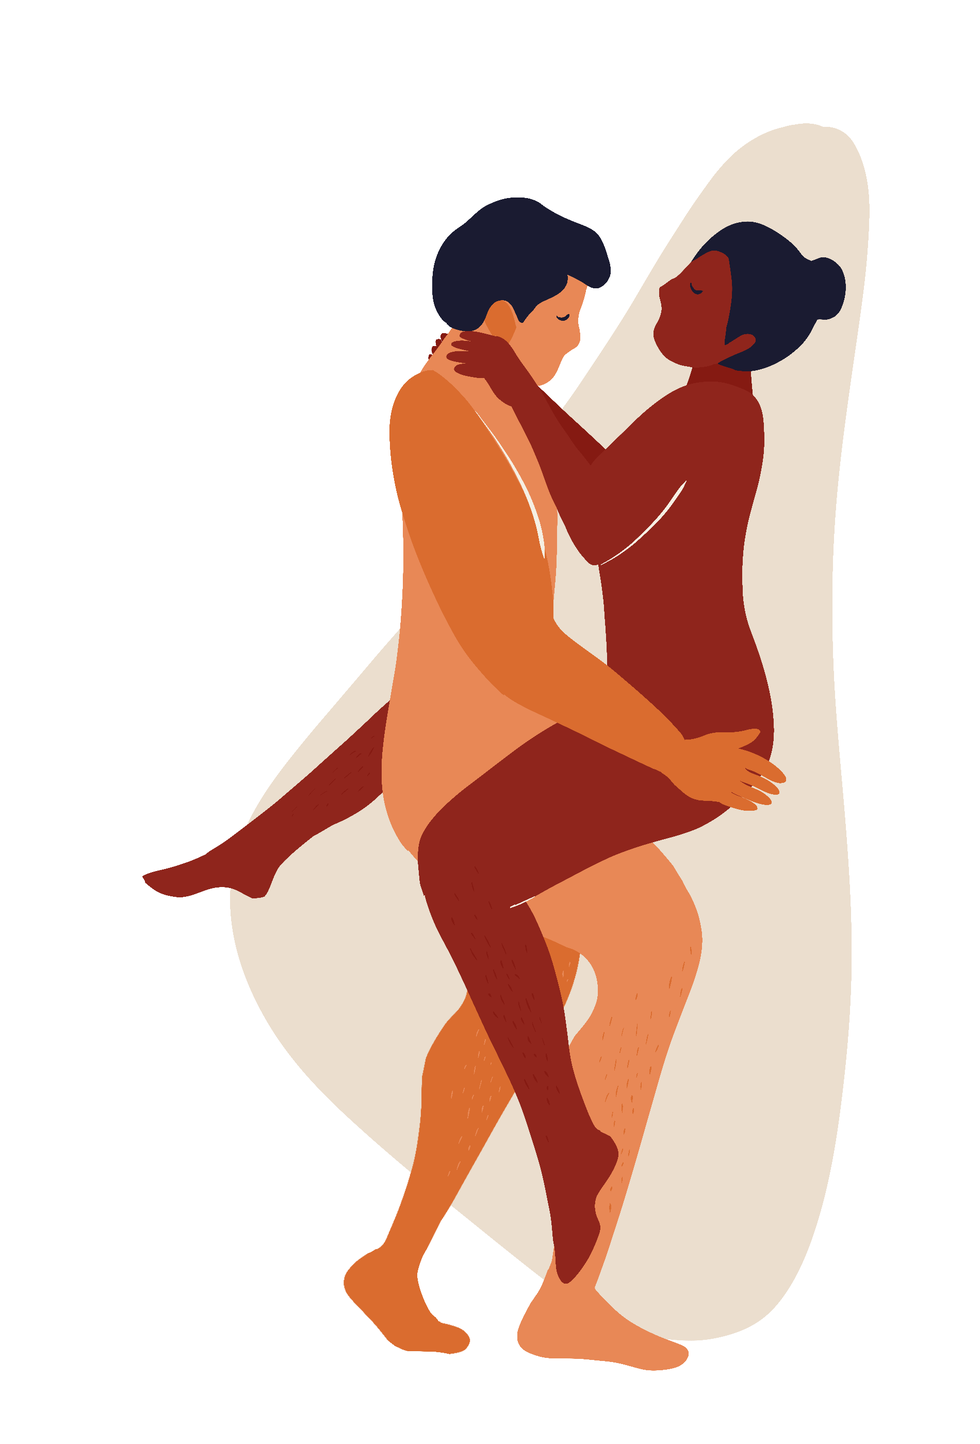 Karma Sutra Sex - 15 Kama Sutra Sex Positions That Couples Can Easily Pull Off